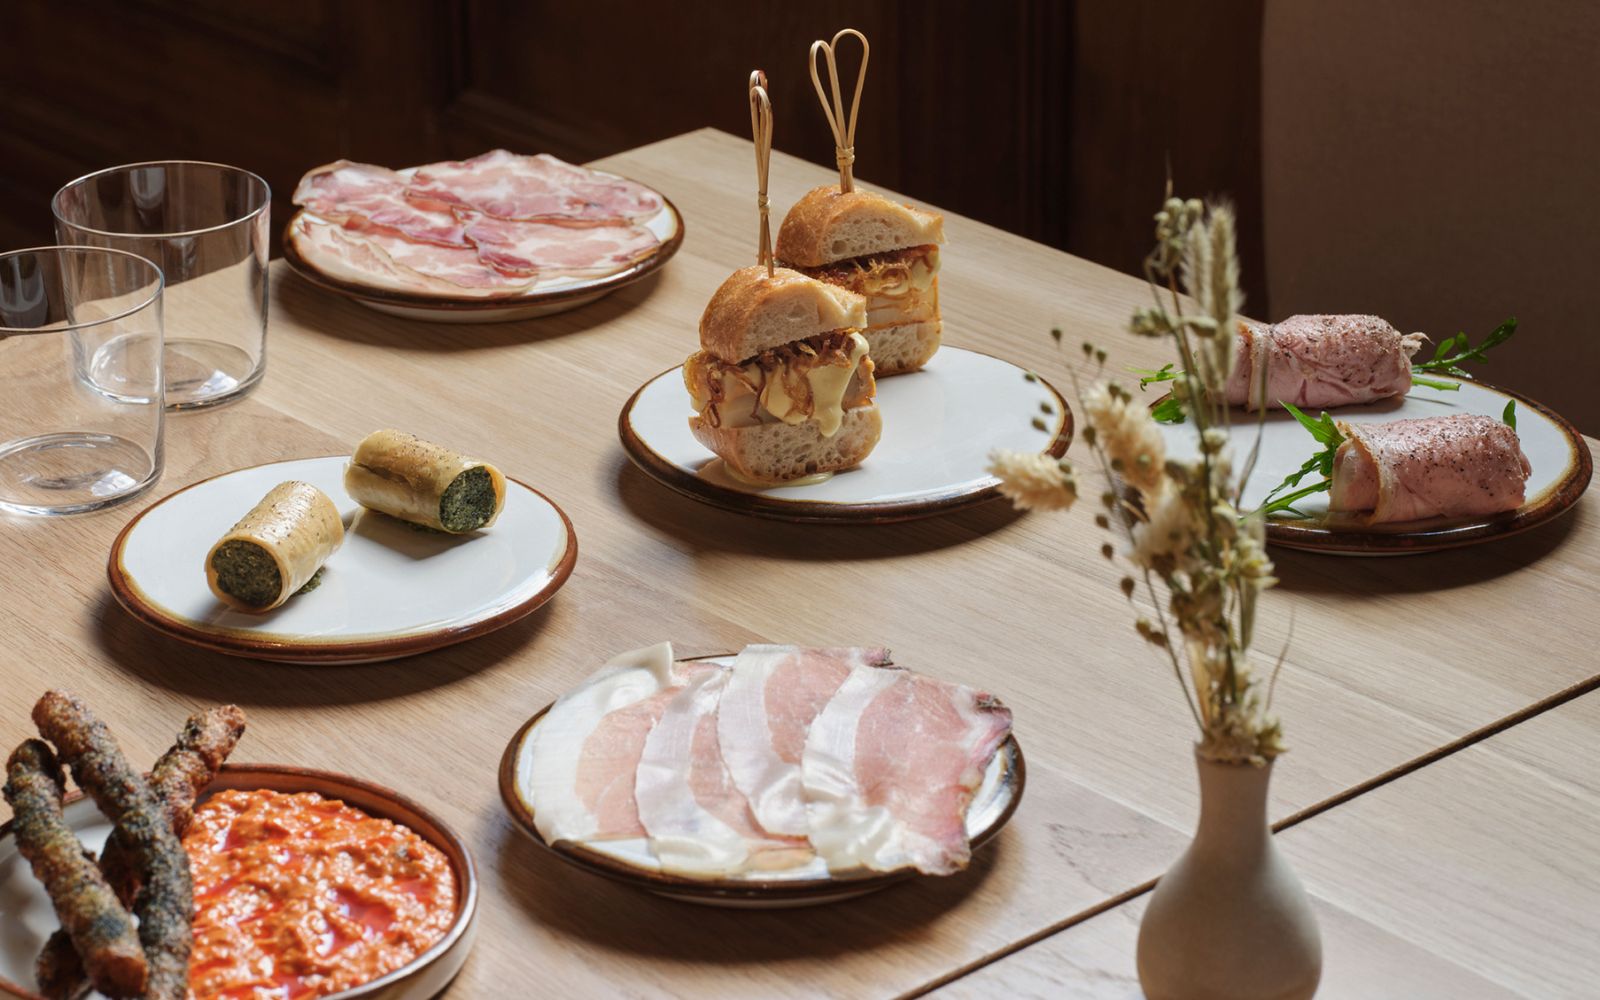 plates of buns, ham and croquettes on a wooden table